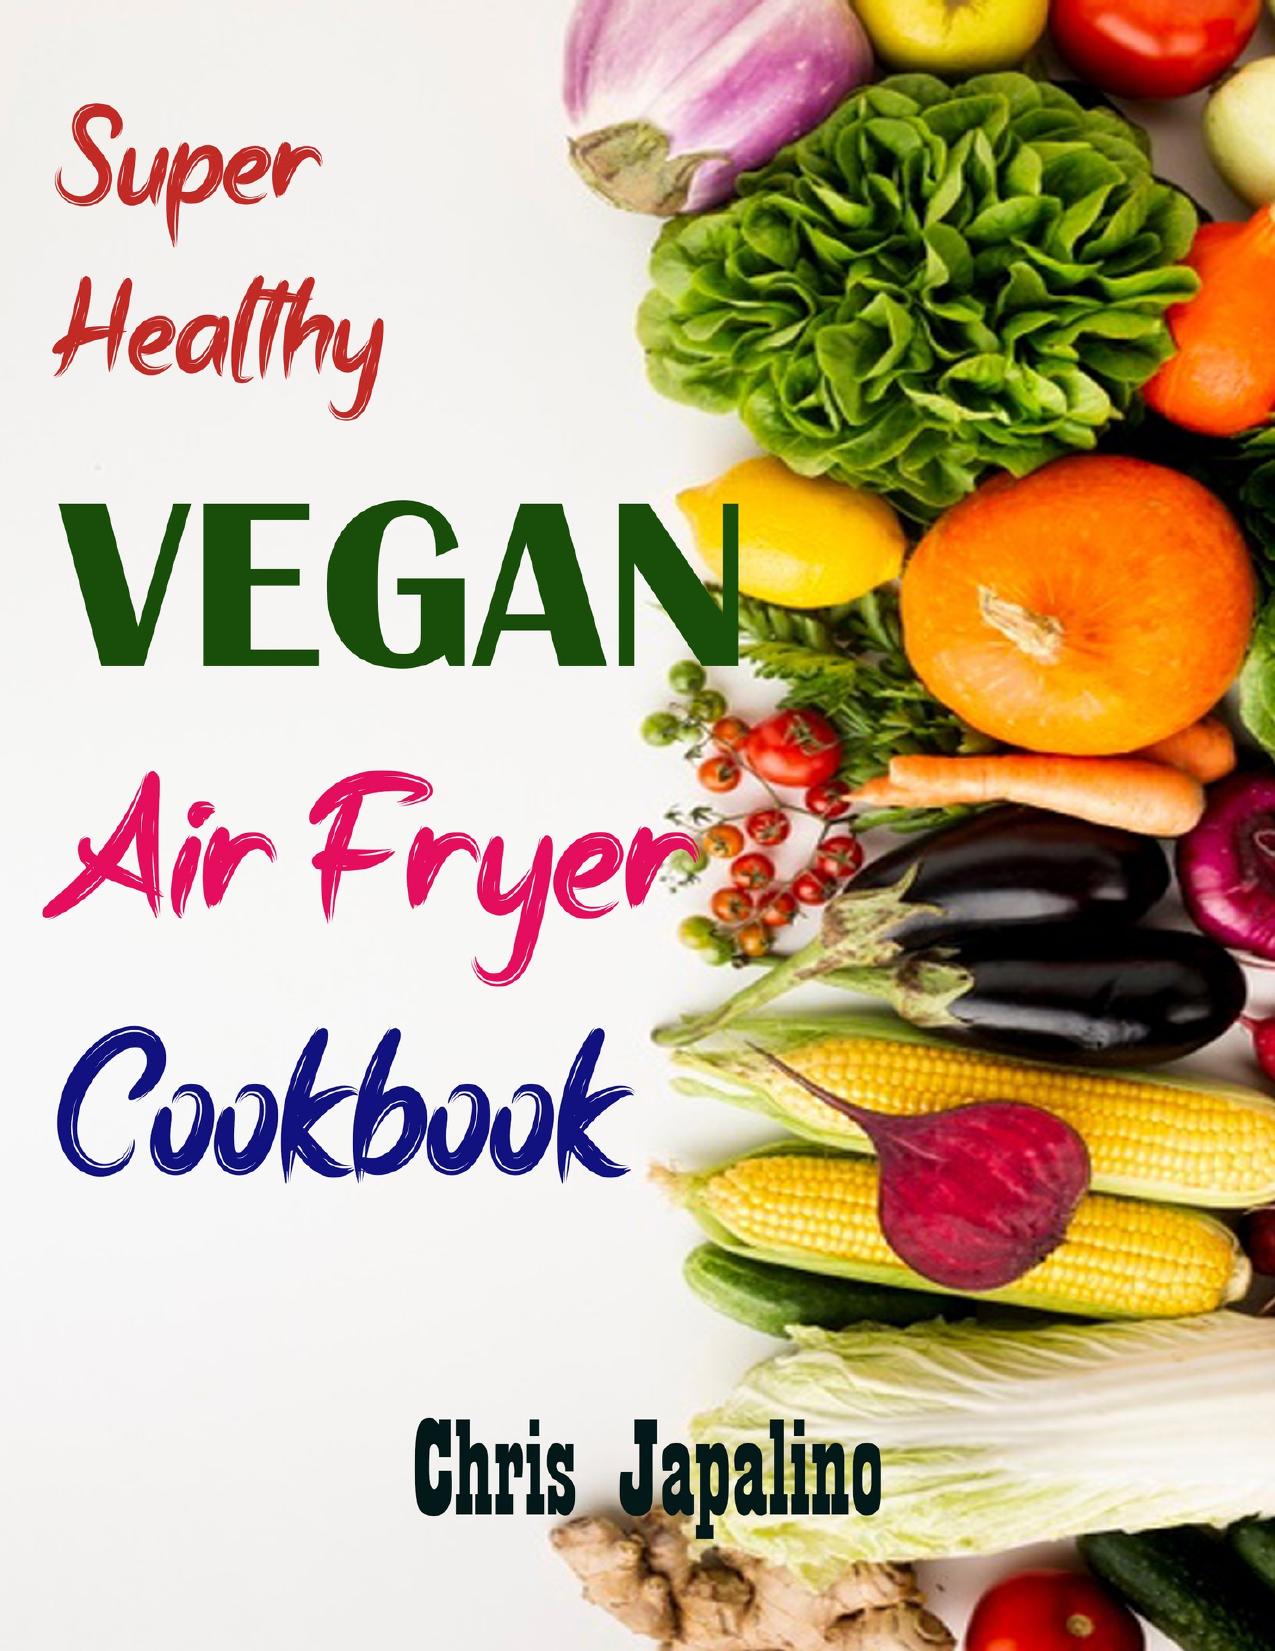 SUPER HEALTHY VEGAN AIR FRYER COOKBOOK: Amazing, Quick, Easy & Affordable Weight Loss Recipes to Fry, Bake, Grill, and Roast by Japalino Chris